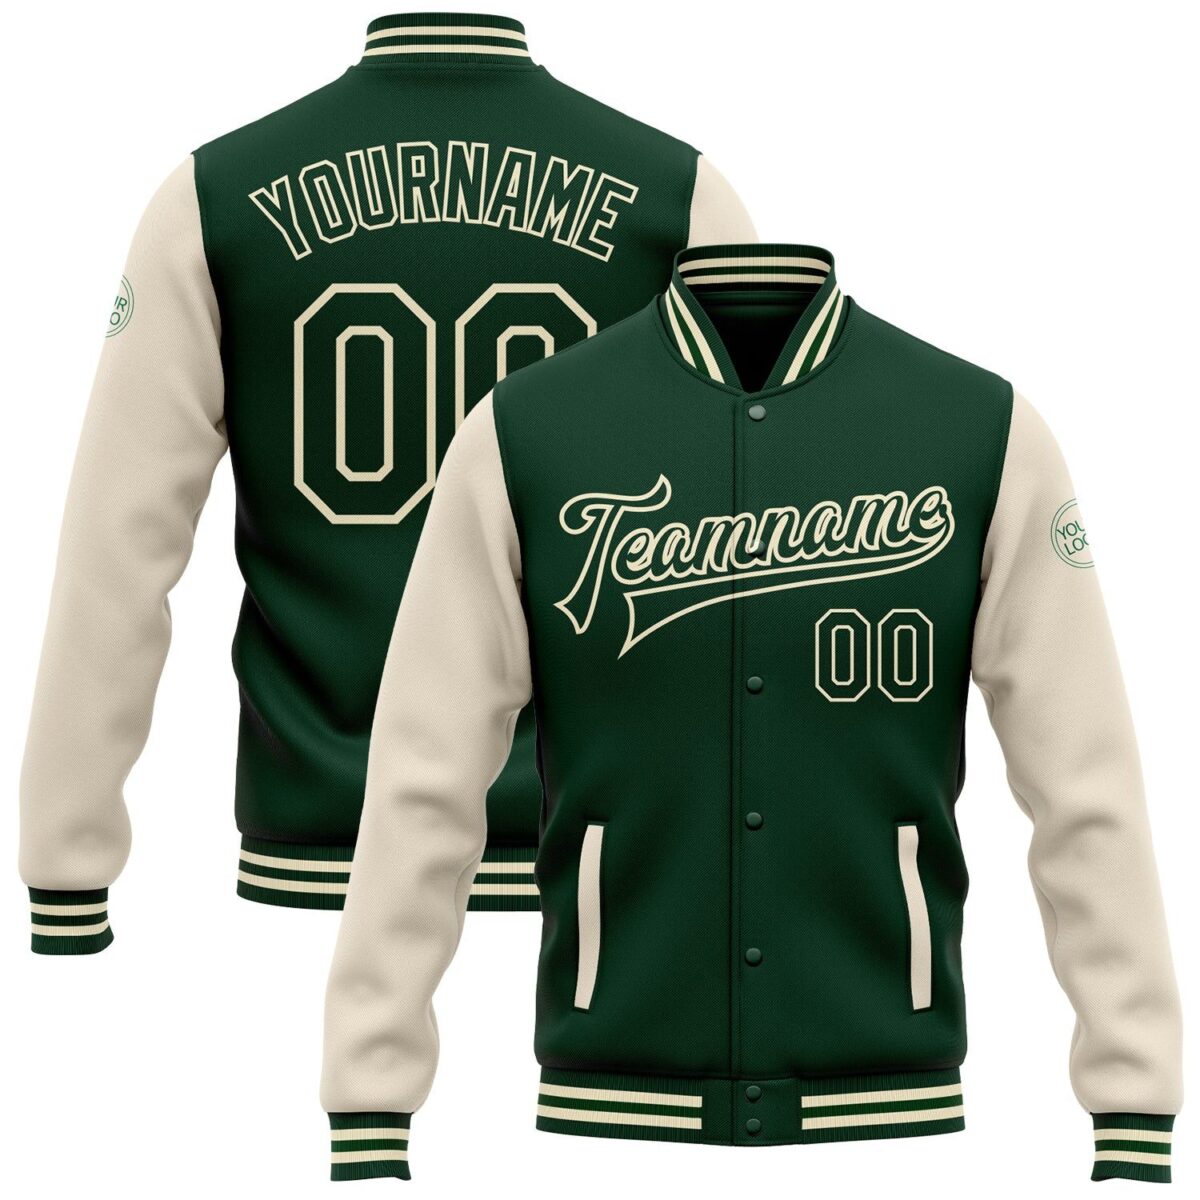 Student College Baseball Jackets with Green & Cream 1